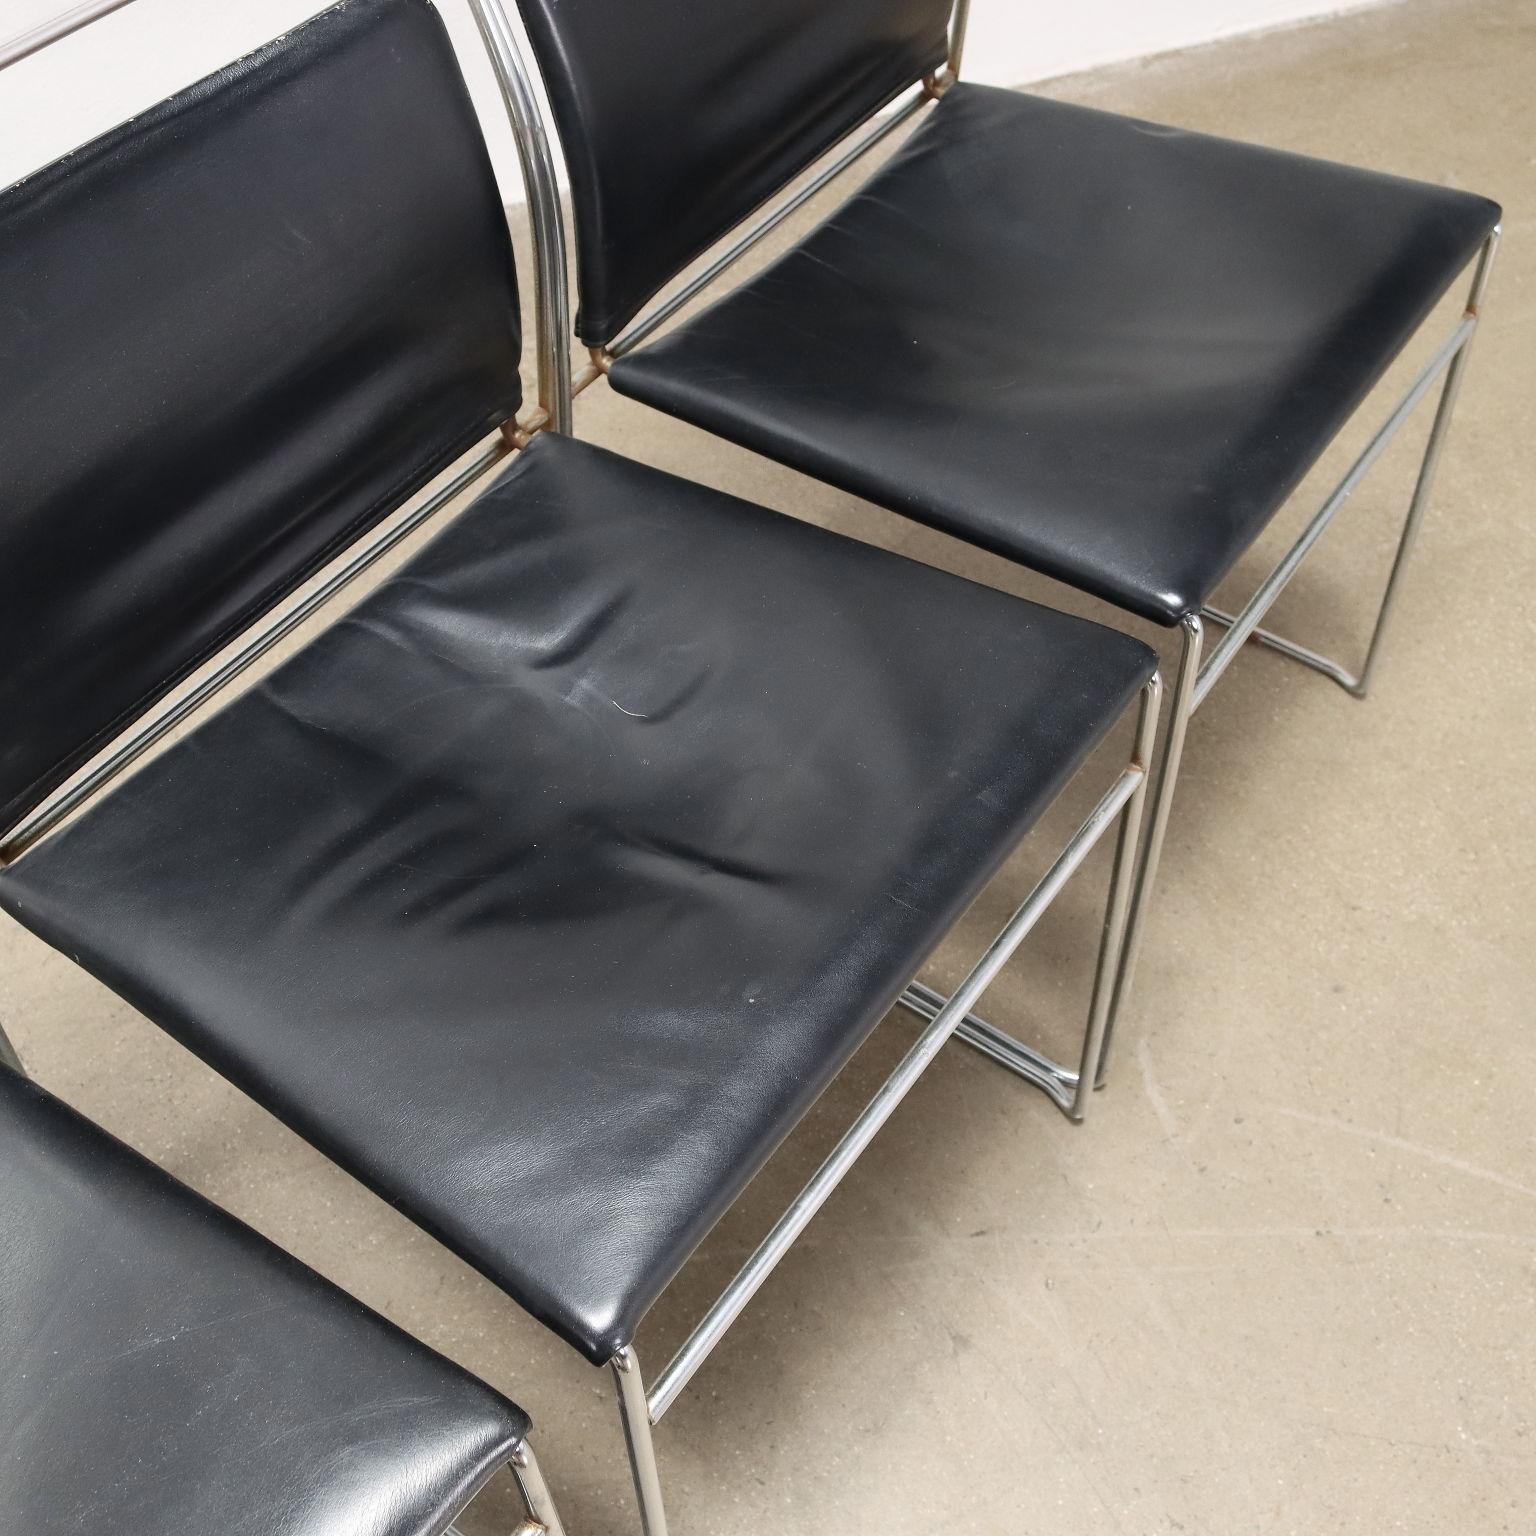 Metal Group of 4 Chairs Simon Gavina Tulu Leather, Italy, 1960s-1970s For Sale